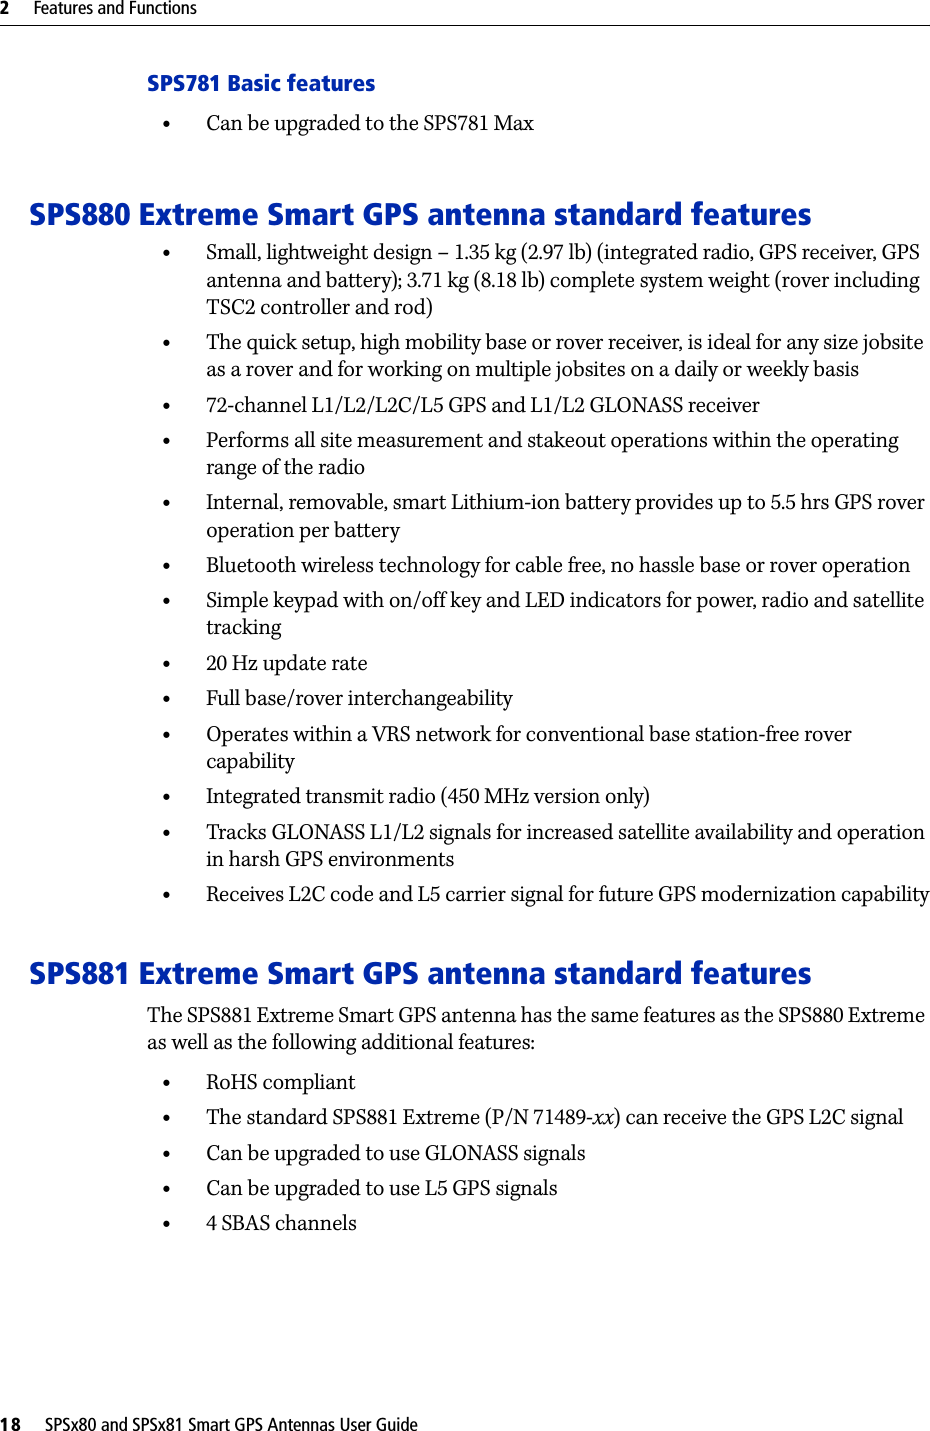 2     Features and Functions18     SPSx80 and SPSx81 Smart GPS Antennas User GuideSPS781 Basic features•Can be upgraded to the SPS781 MaxSPS880 Extreme Smart GPS antenna standard features•Small, lightweight design – 1.35 kg (2.97 lb) (integrated radio, GPS receiver, GPS antenna and battery); 3.71 kg (8.18 lb) complete system weight (rover including TSC2 controller and rod)•The quick setup, high mobility base or rover receiver, is ideal for any size jobsite as a rover and for working on multiple jobsites on a daily or weekly basis•72-channel L1/L2/L2C/L5 GPS and L1/L2 GLONASS receiver•Performs all site measurement and stakeout operations within the operating range of the radio•Internal, removable, smart Lithium-ion battery provides up to 5.5 hrs GPS rover operation per battery •Bluetooth wireless technology for cable free, no hassle base or rover operation•Simple keypad with on/off key and LED indicators for power, radio and satellite tracking•20 Hz update rate•Full base/rover interchangeability•Operates within a VRS network for conventional base station-free rover capability•Integrated transmit radio (450 MHz version only)•Tracks GLONASS L1/L2 signals for increased satellite availability and operation in harsh GPS environments•Receives L2C code and L5 carrier signal for future GPS modernization capabilitySPS881 Extreme Smart GPS antenna standard featuresThe SPS881 Extreme Smart GPS antenna has the same features as the SPS880 Extreme as well as the following additional features:•RoHS compliant•The standard SPS881 Extreme (P/N 71489-xx) can receive the GPS L2C signal•Can be upgraded to use GLONASS signals•Can be upgraded to use L5 GPS signals•4 SBAS channels